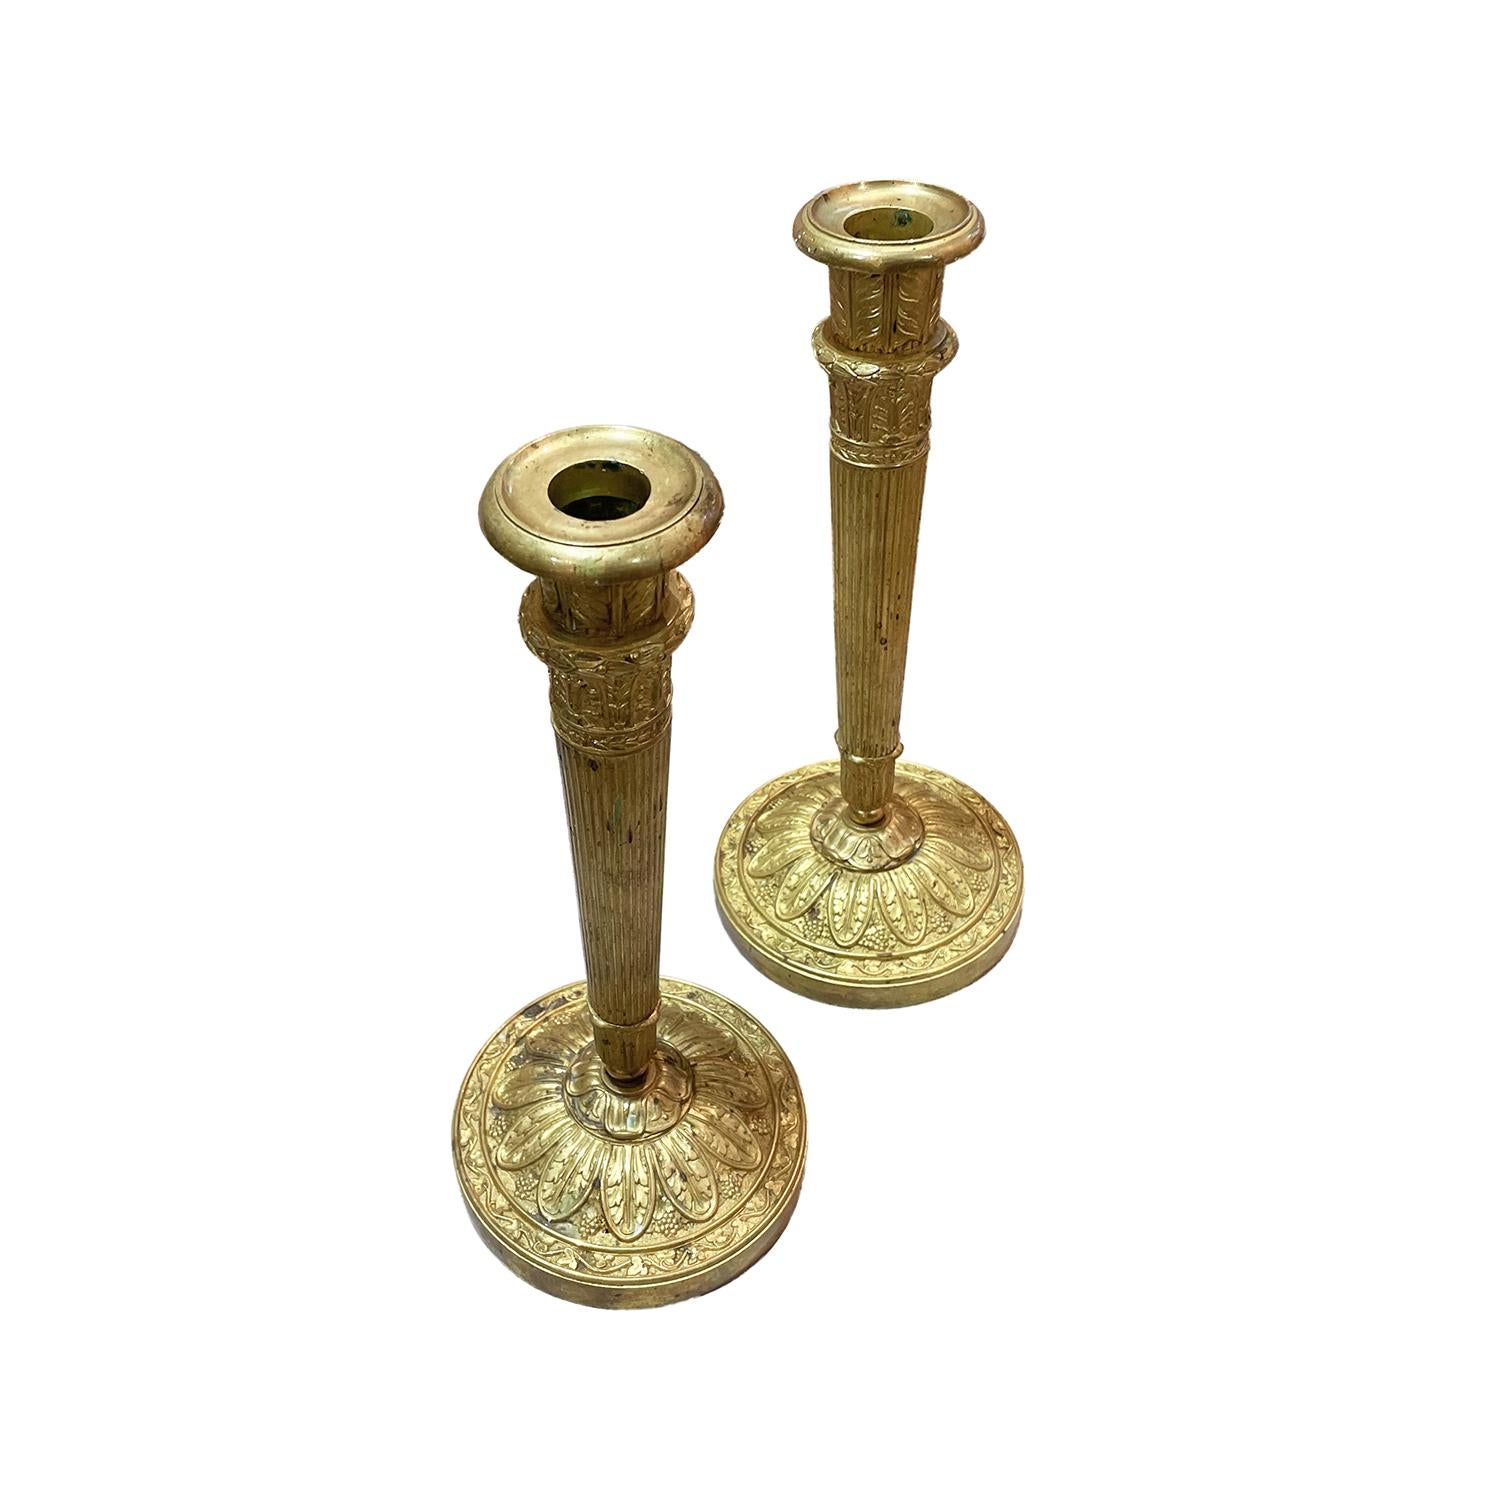 A gold, antique French pair of candle holders with loose candle cuffs, made of hand crafted gilded bronze, in good condition. The detailed candlesticks have downwardly tapering, fluted shafts, supported by a round footplate. The base is